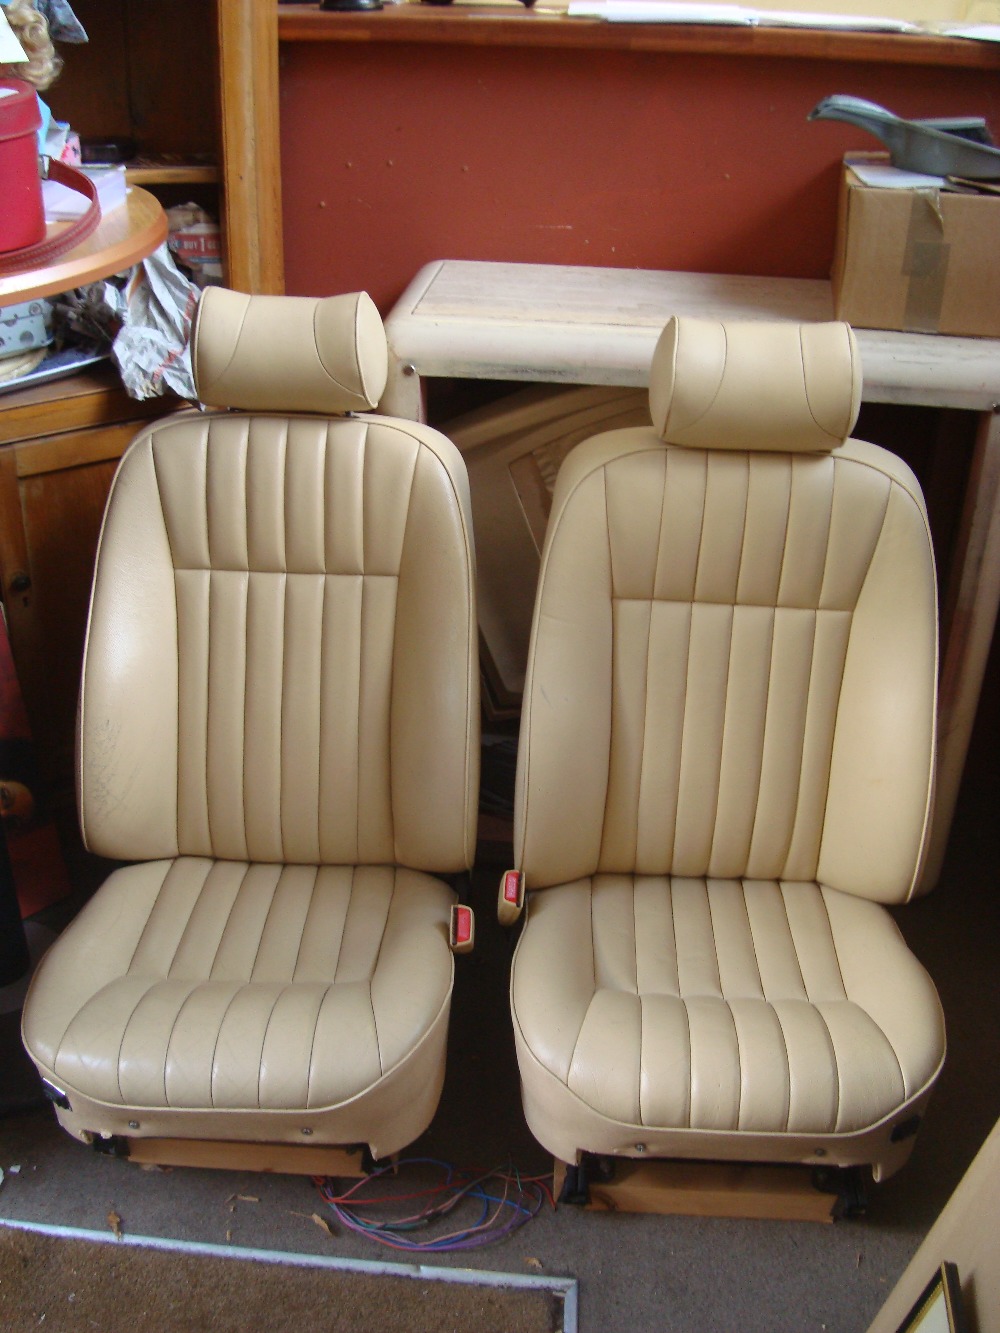 Two leather upholstered Jaguar seats.